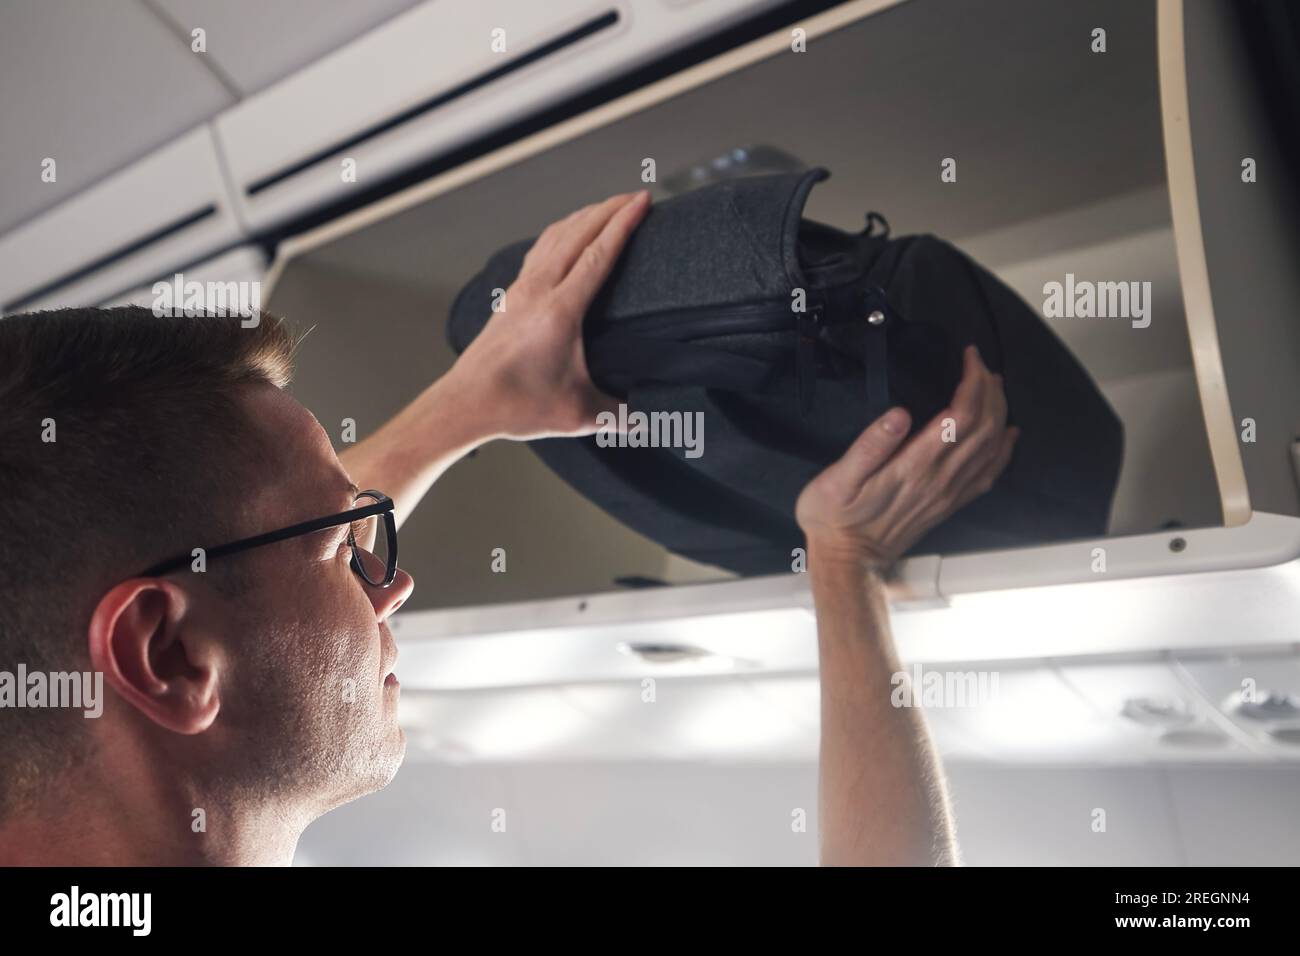 Man with backpack is travel by airplane. Passenger putting hand baggage in lockers above seats of plane. Stock Photo